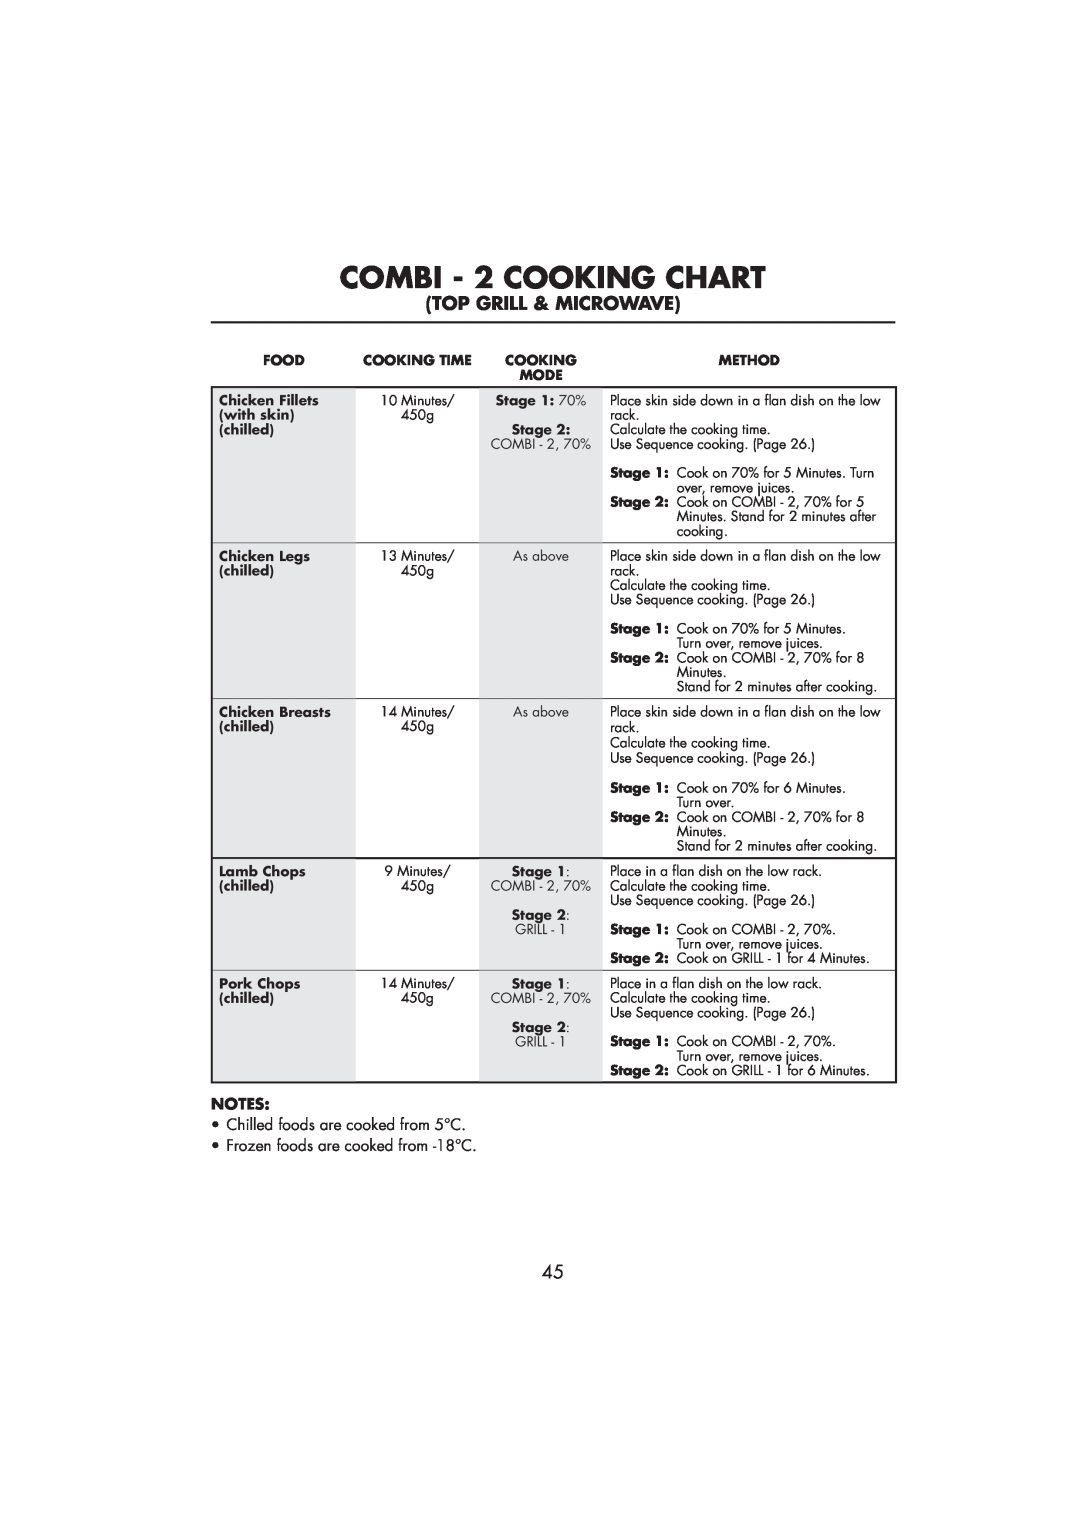 Sharp R-890SLM operation manual COMBI - 2 COOKING CHART, Top Grill & Microwave 